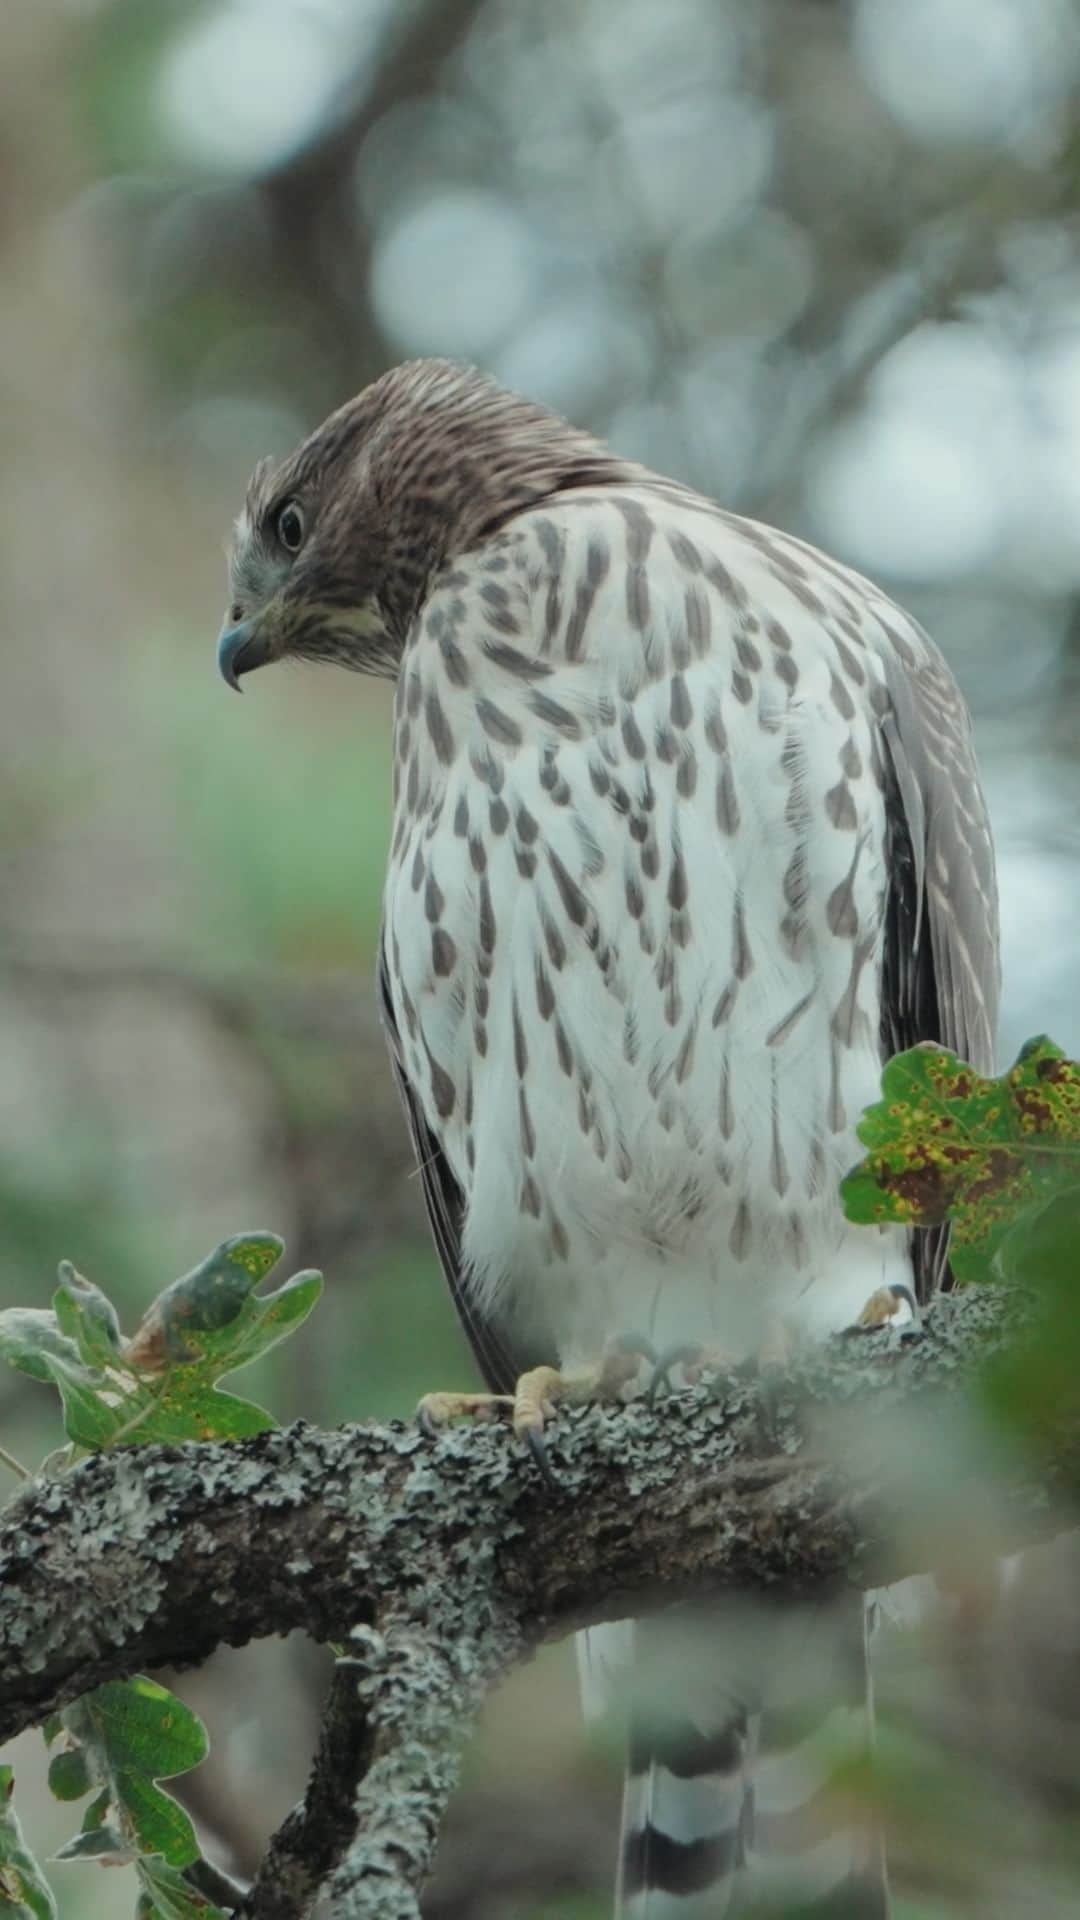 Discoveryのインスタグラム：「#DidYouKnow urban ecosystems can be home to generations of incredible wildlife? Photographer @itsryanwilkes documented a family of Cooper's hawks growing into their place as top predators in his #Vancouver, British Columbia neighborhood. Take a look into their secret world, and learn how to protect birds of prey in your own backyard! 🪶  #DiscoveryCollab #birdwatching #urbanwildlife」